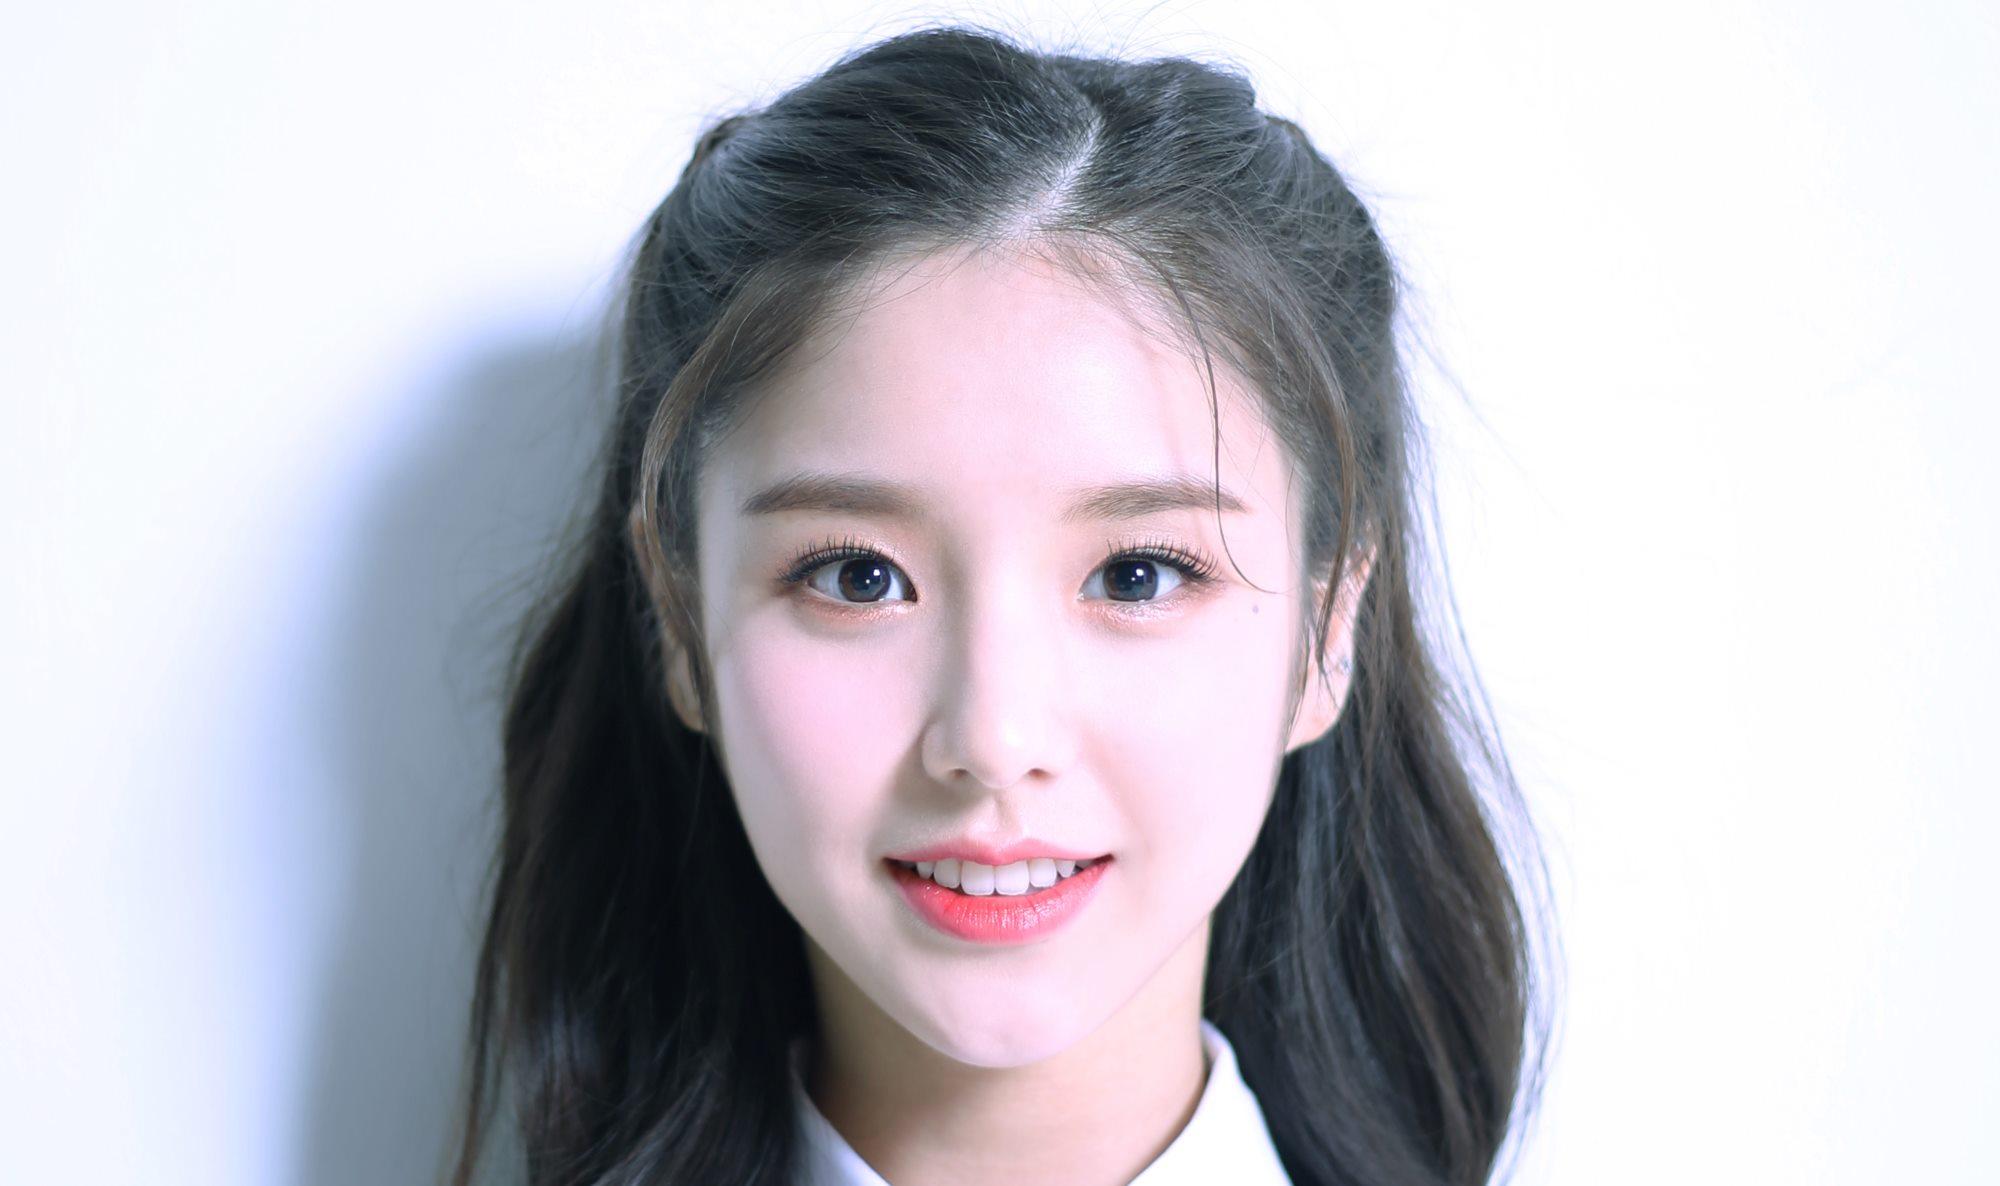 Loona Members Profile Kpop Name, Age, Height, Religion